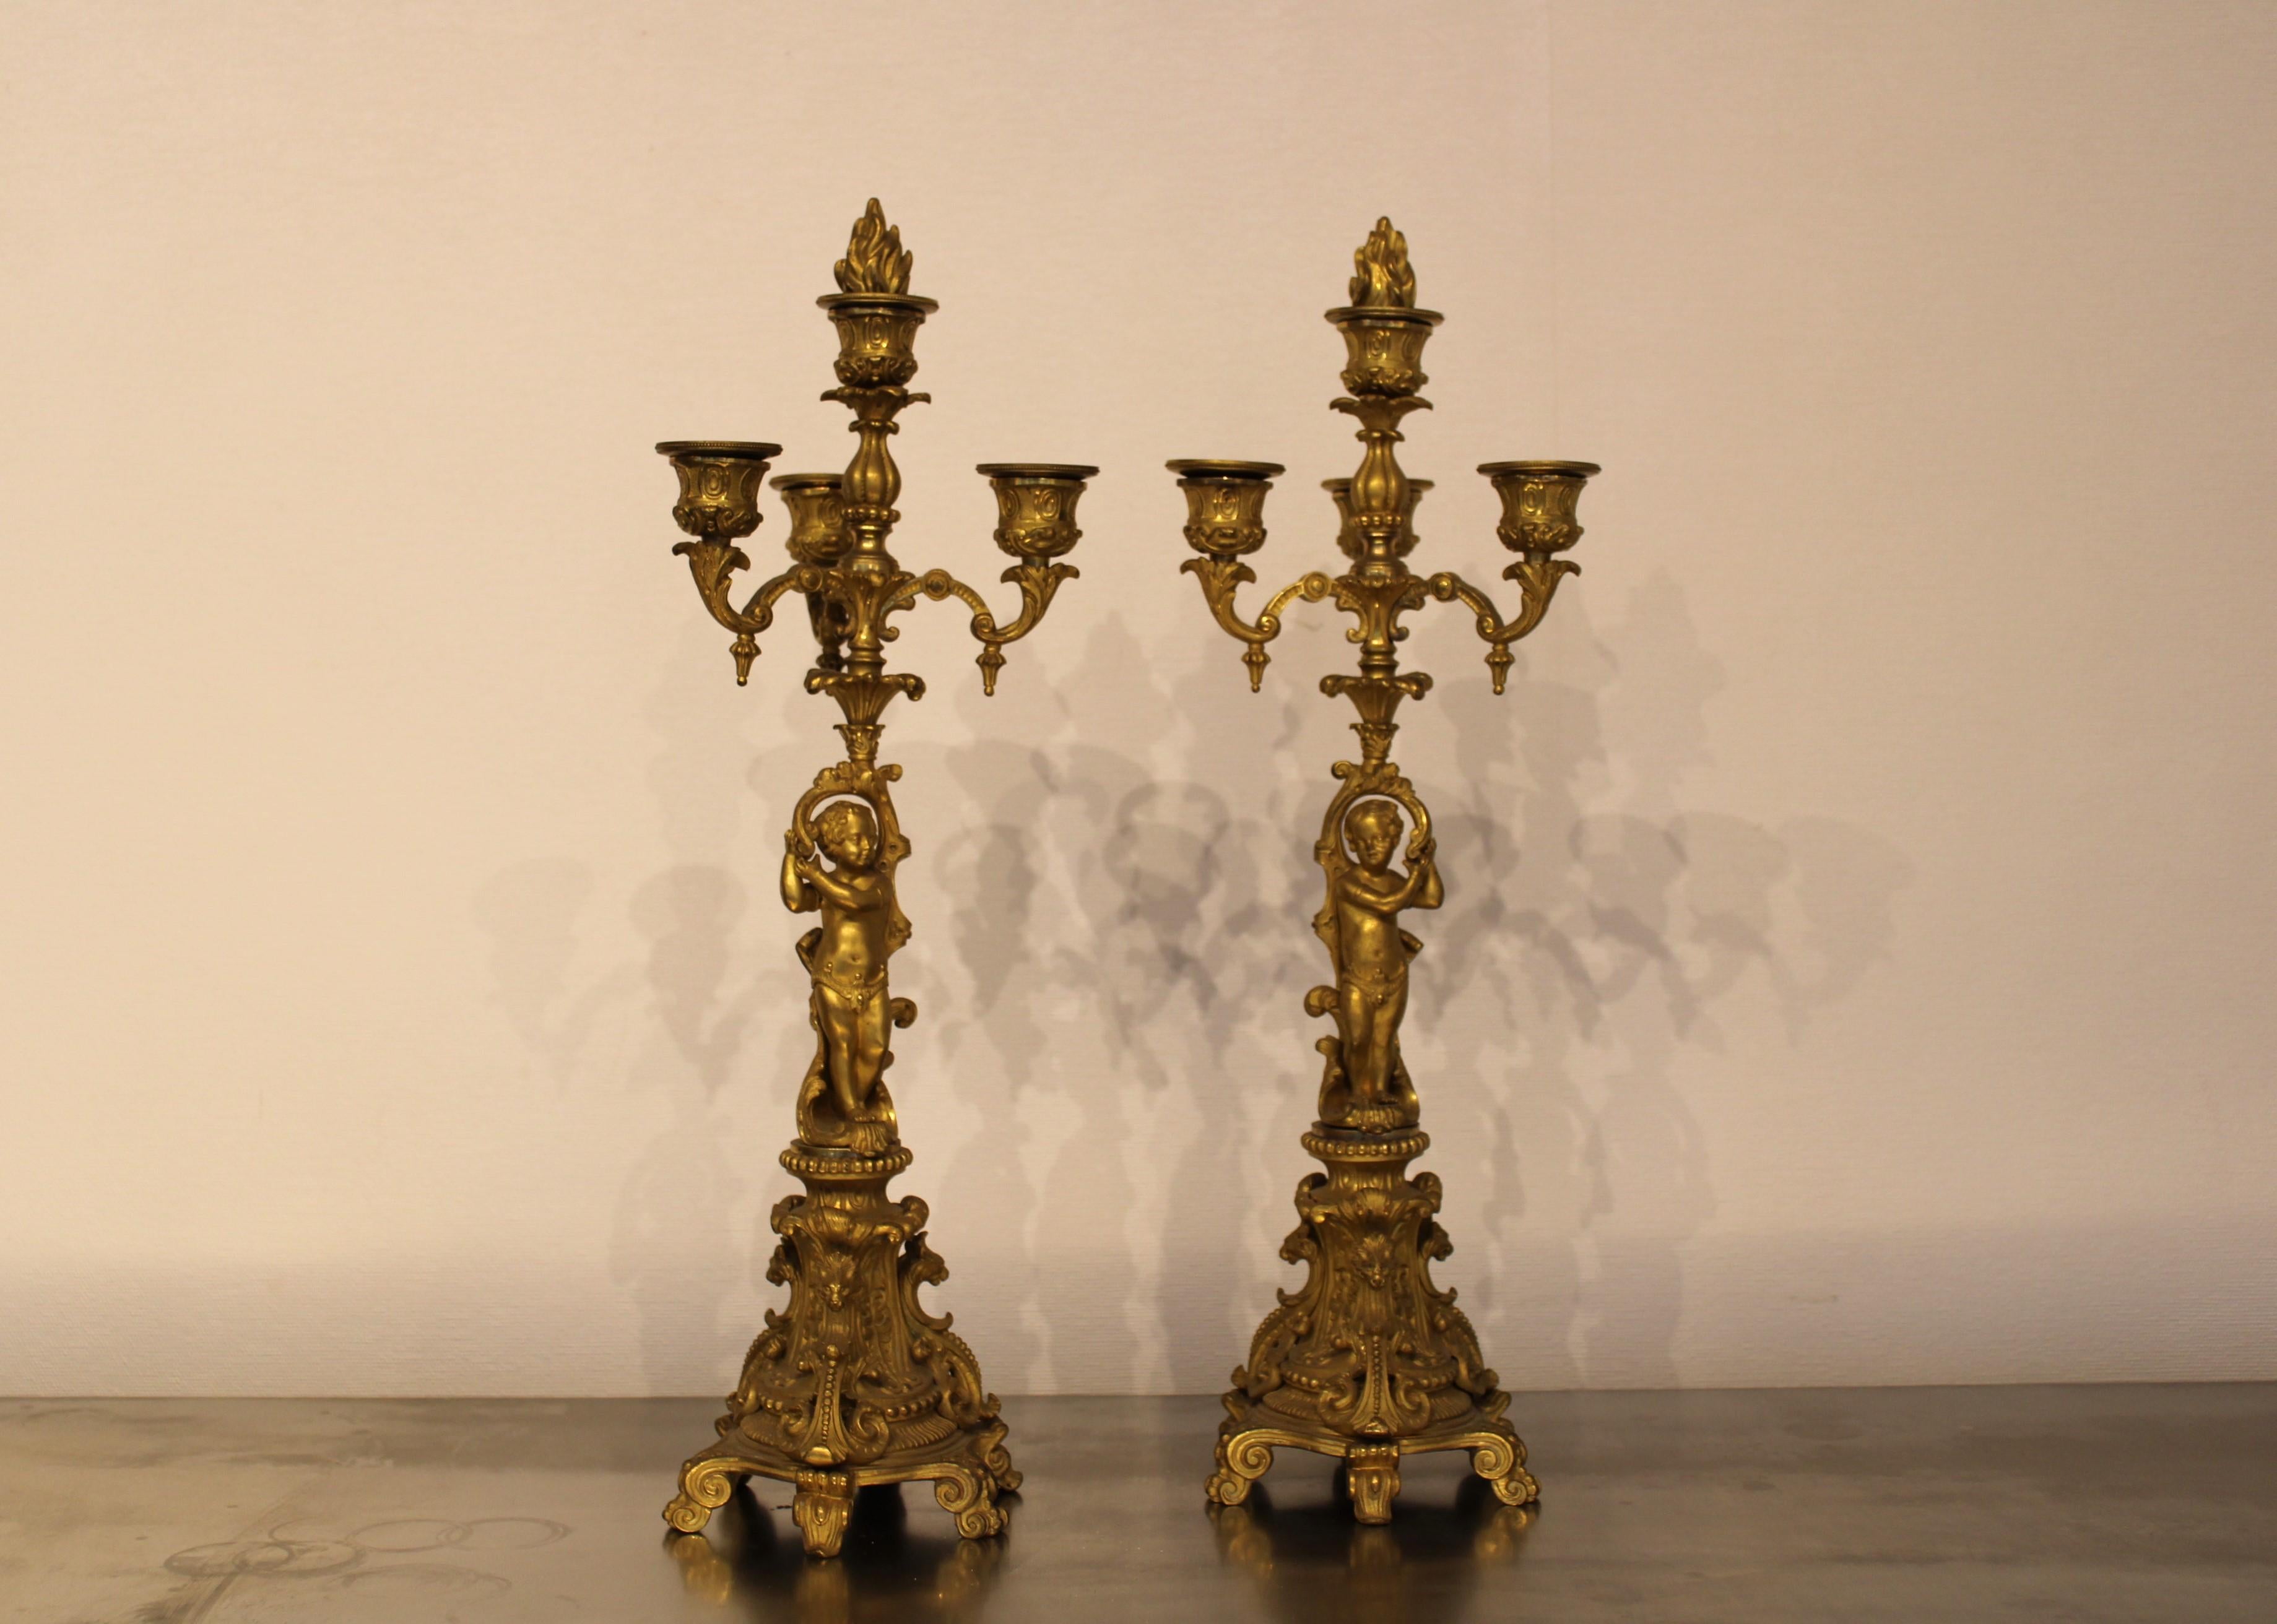 Pair of candelabra in chiseled and gilded bronze,
France, late 19th century